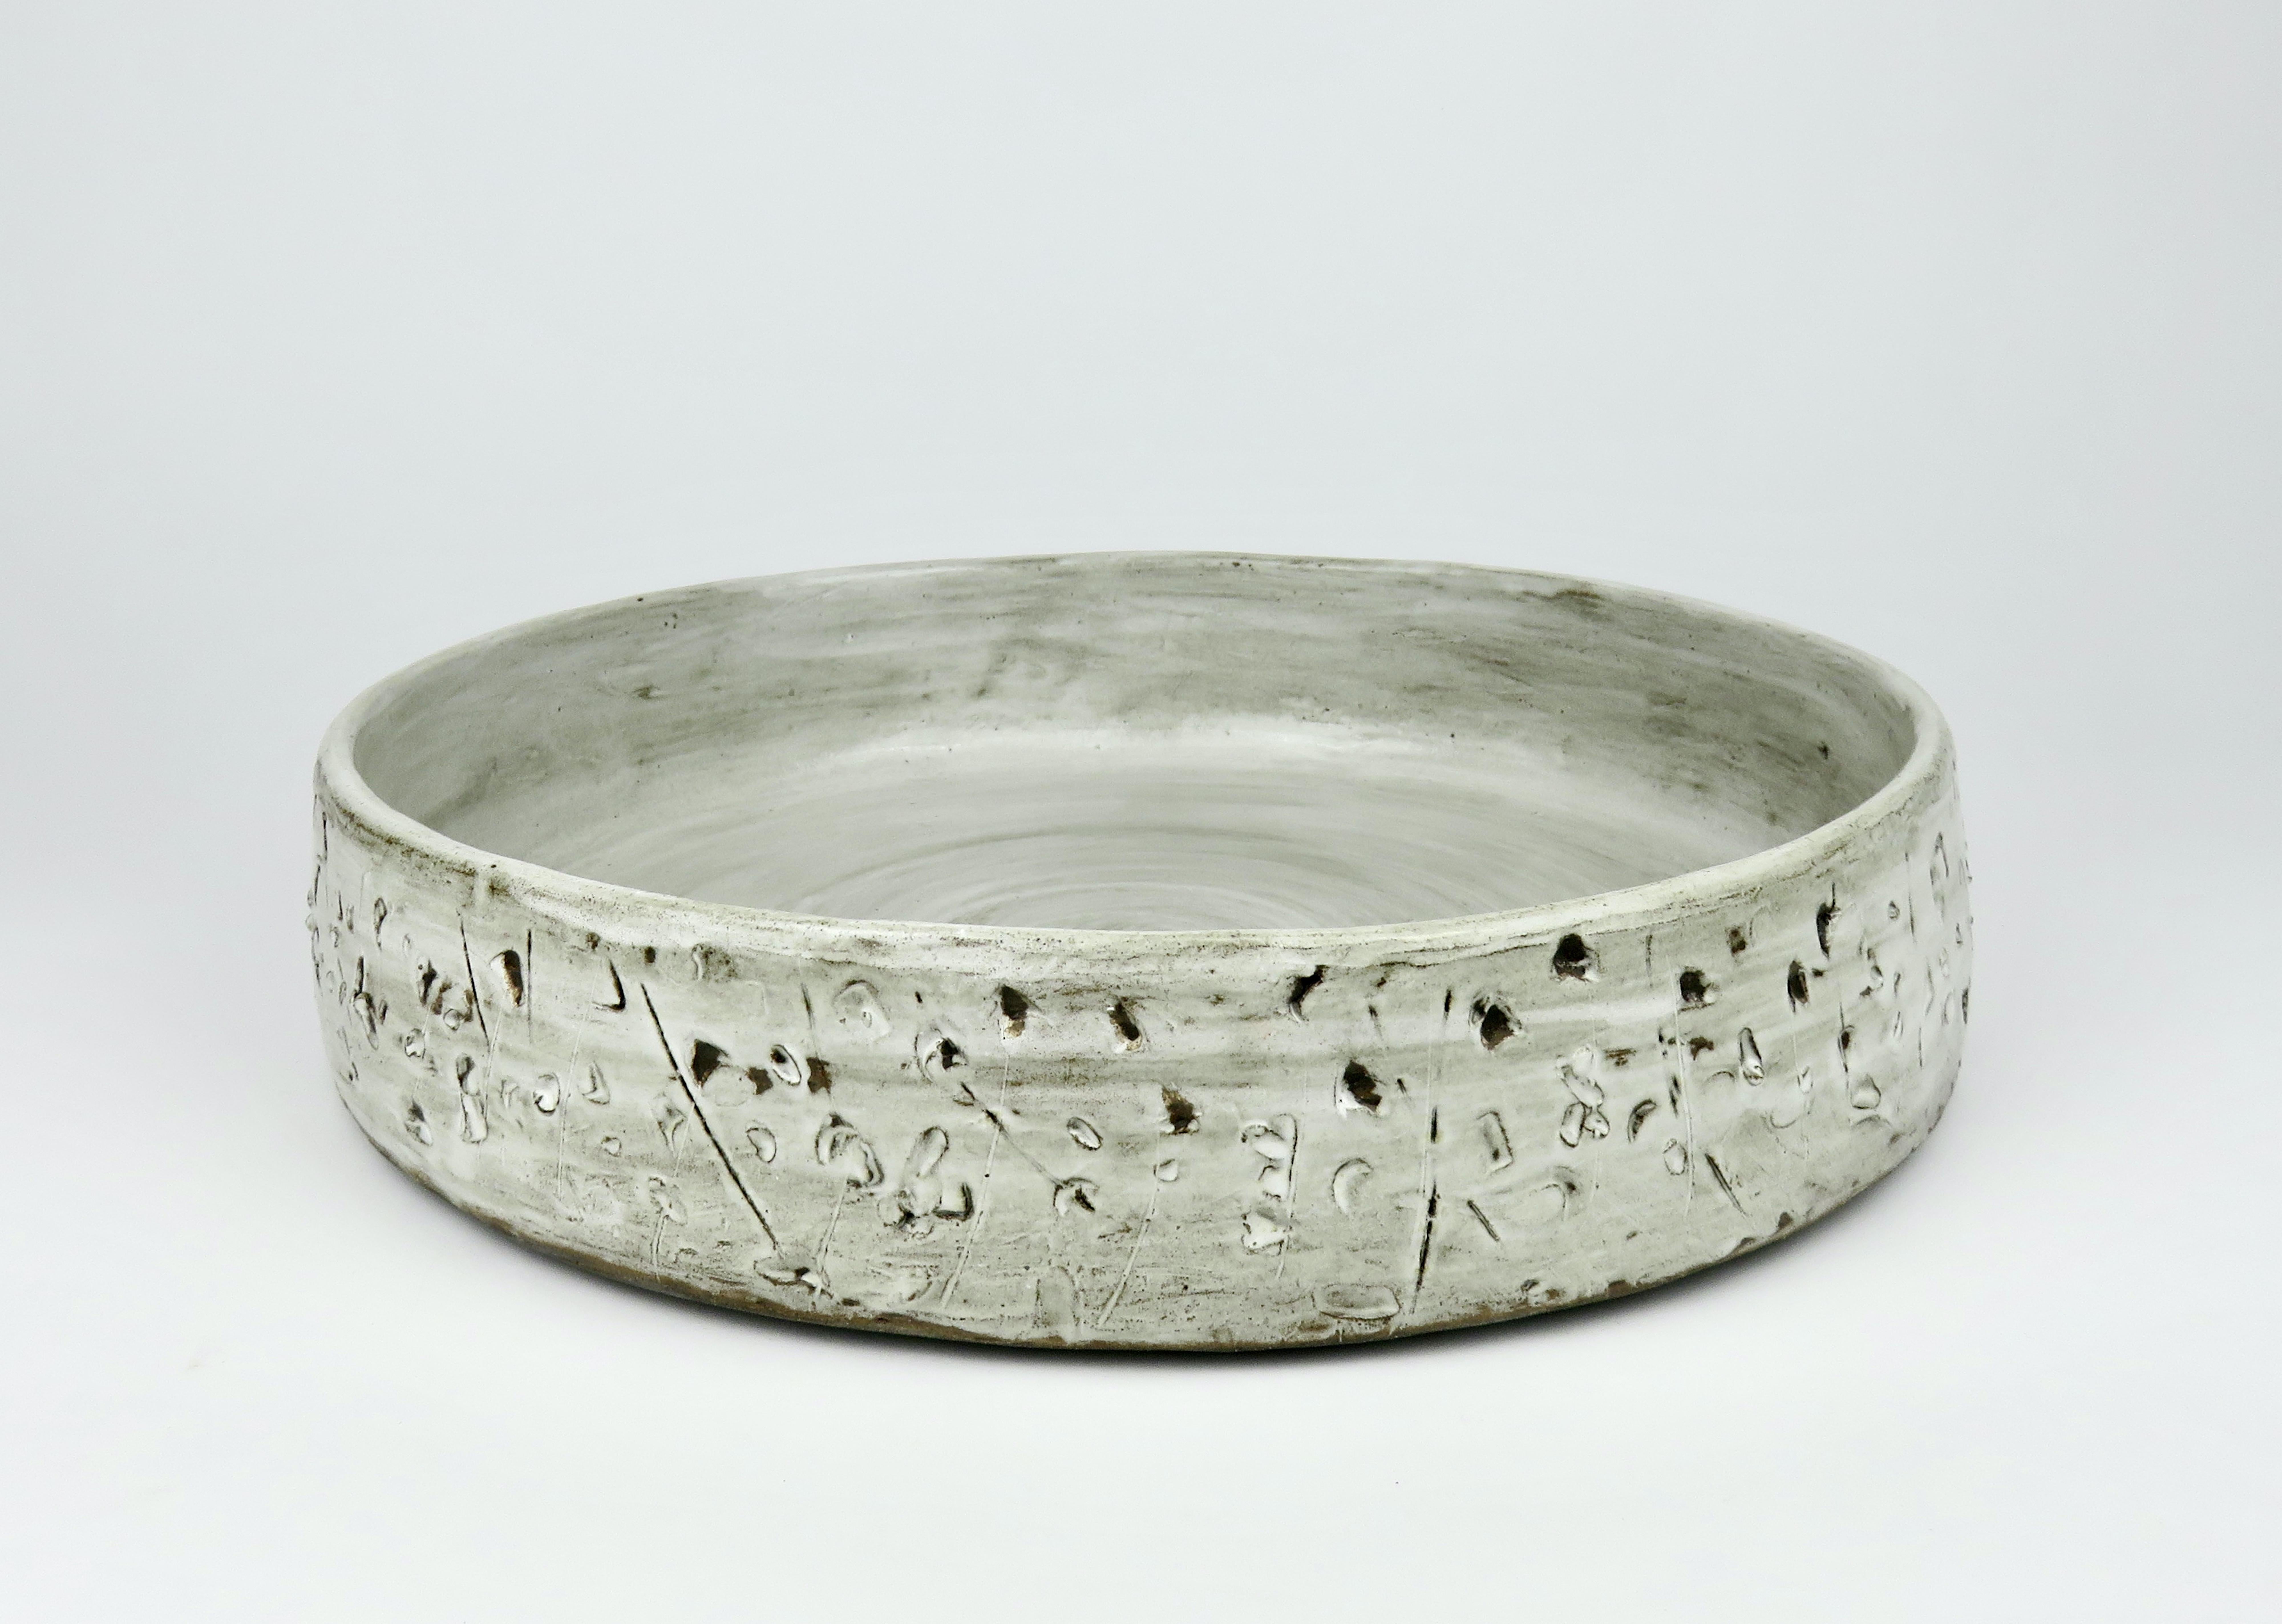 Organic Modern Large Low Serving Bowl, Carved Exterior In Off-White Glaze, Hand Built Ceramic